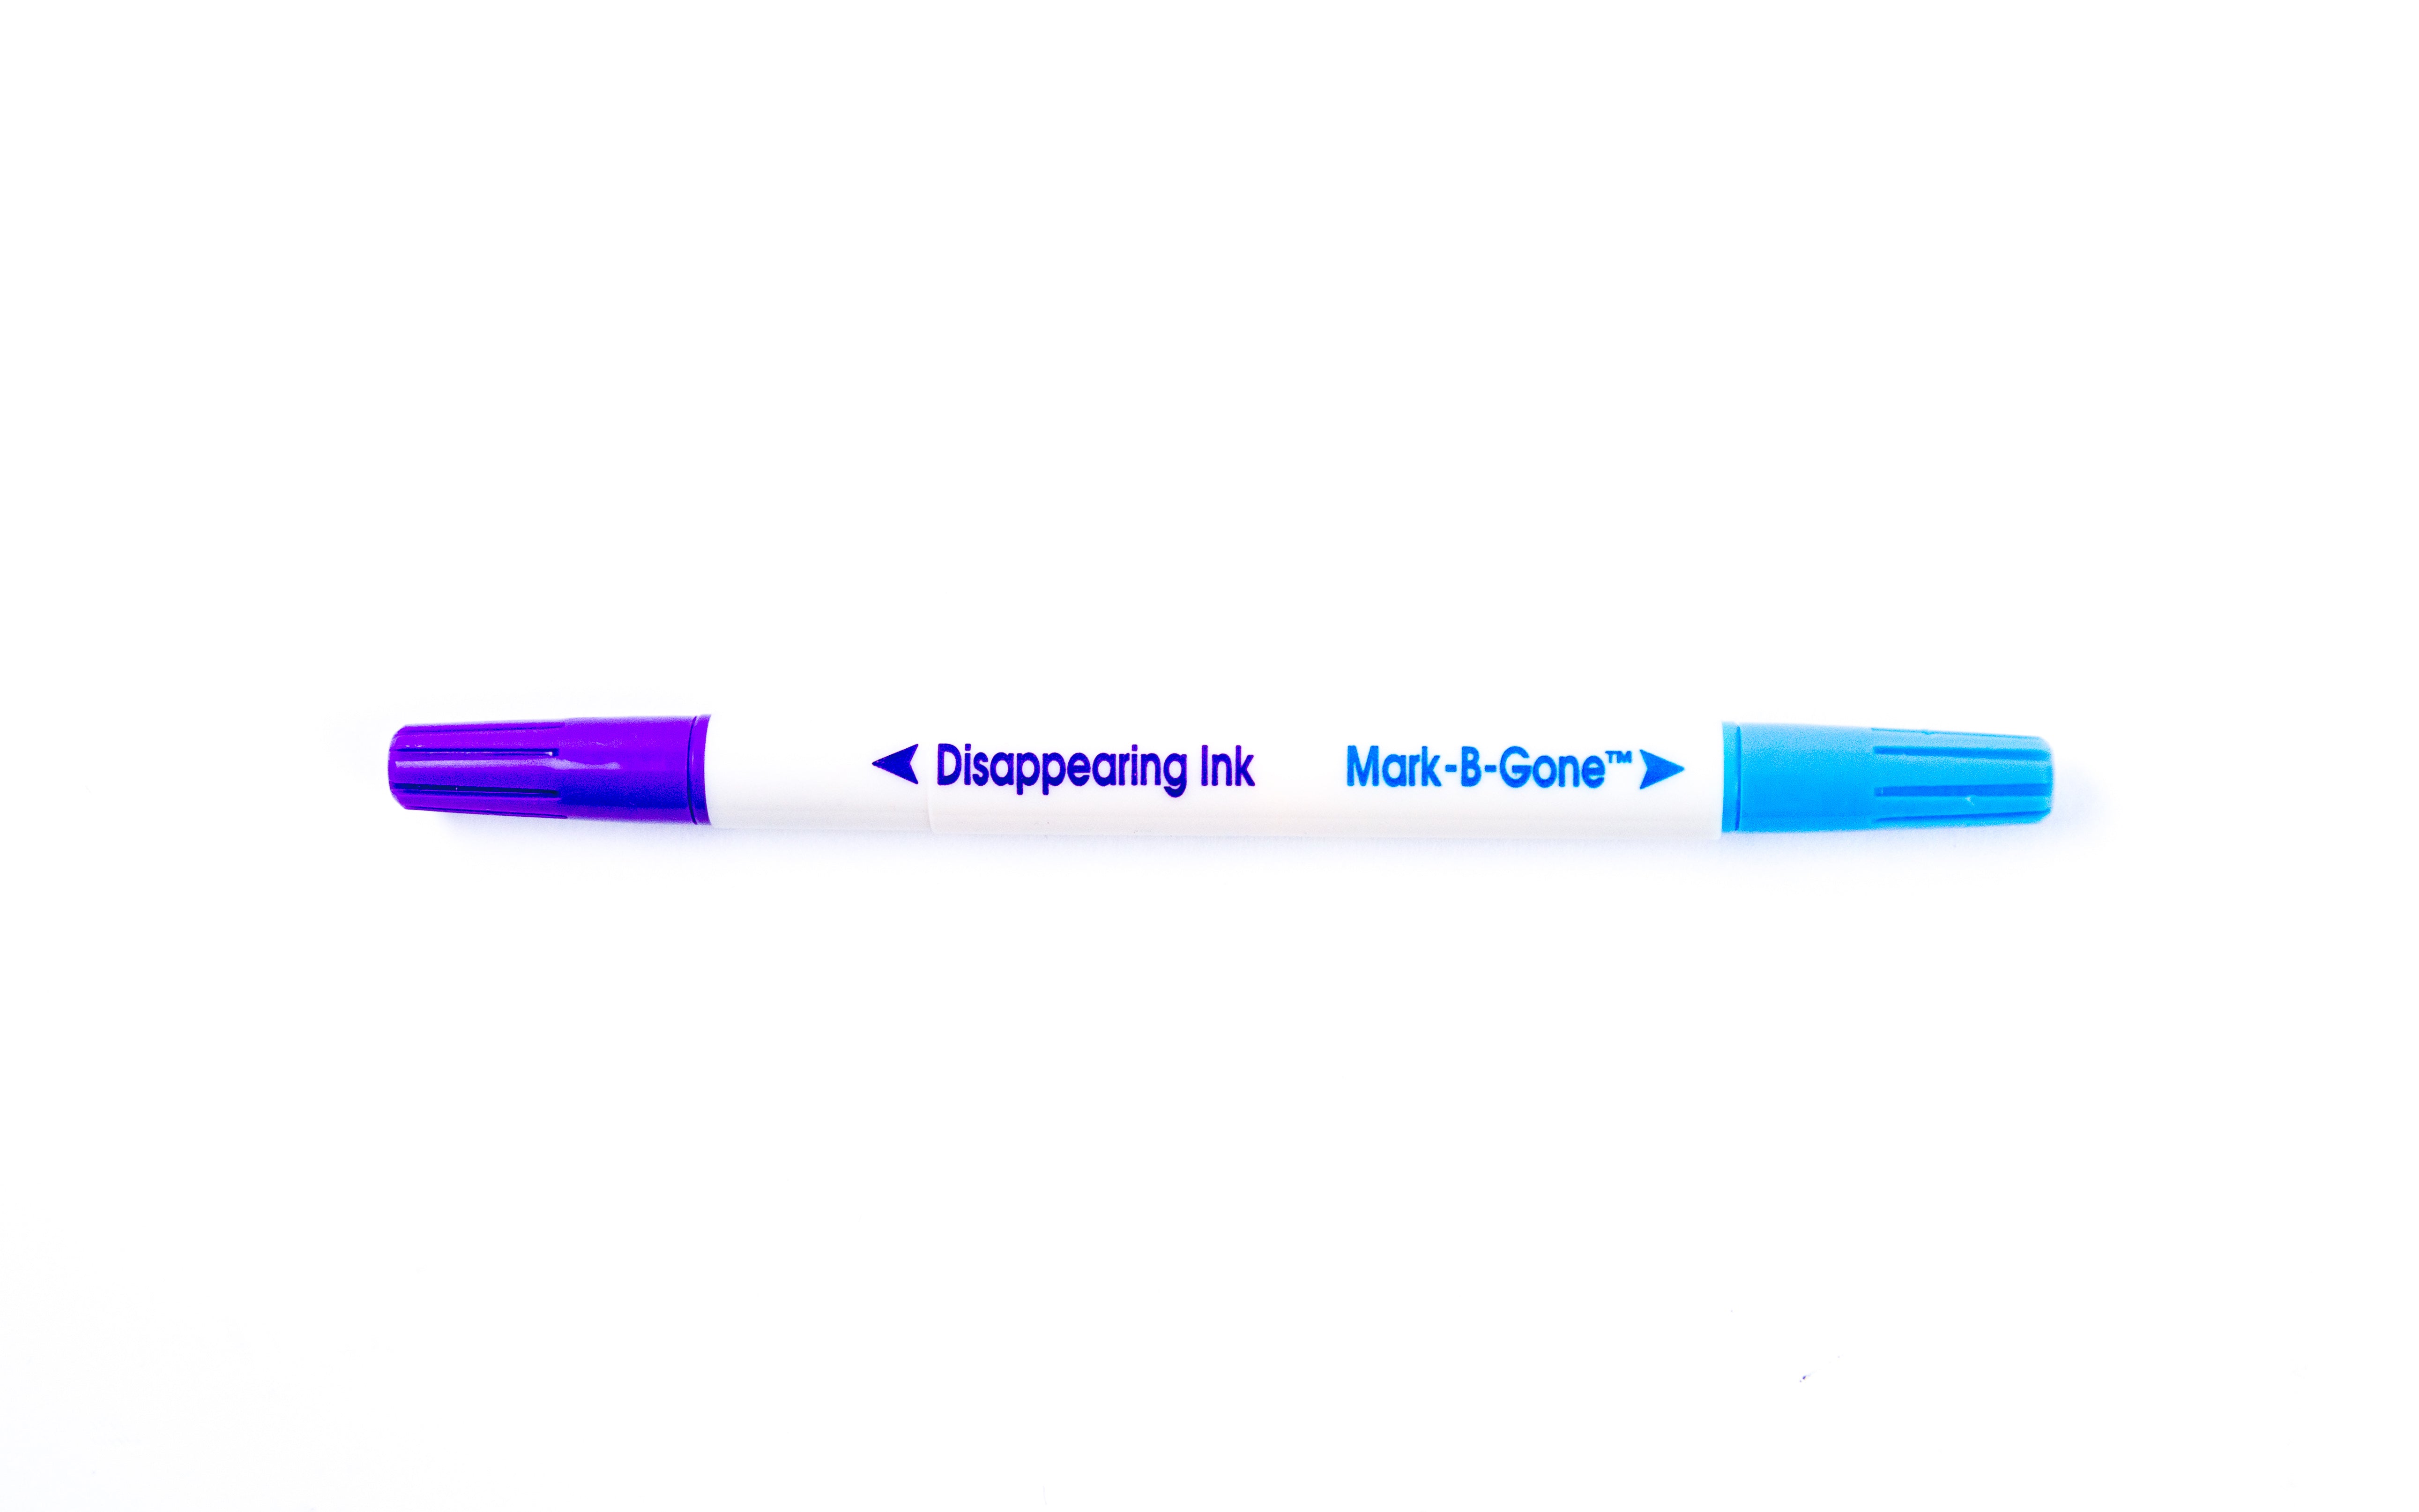 Shop for Fabric Marking Disappearing Ink Pen @ HPFY